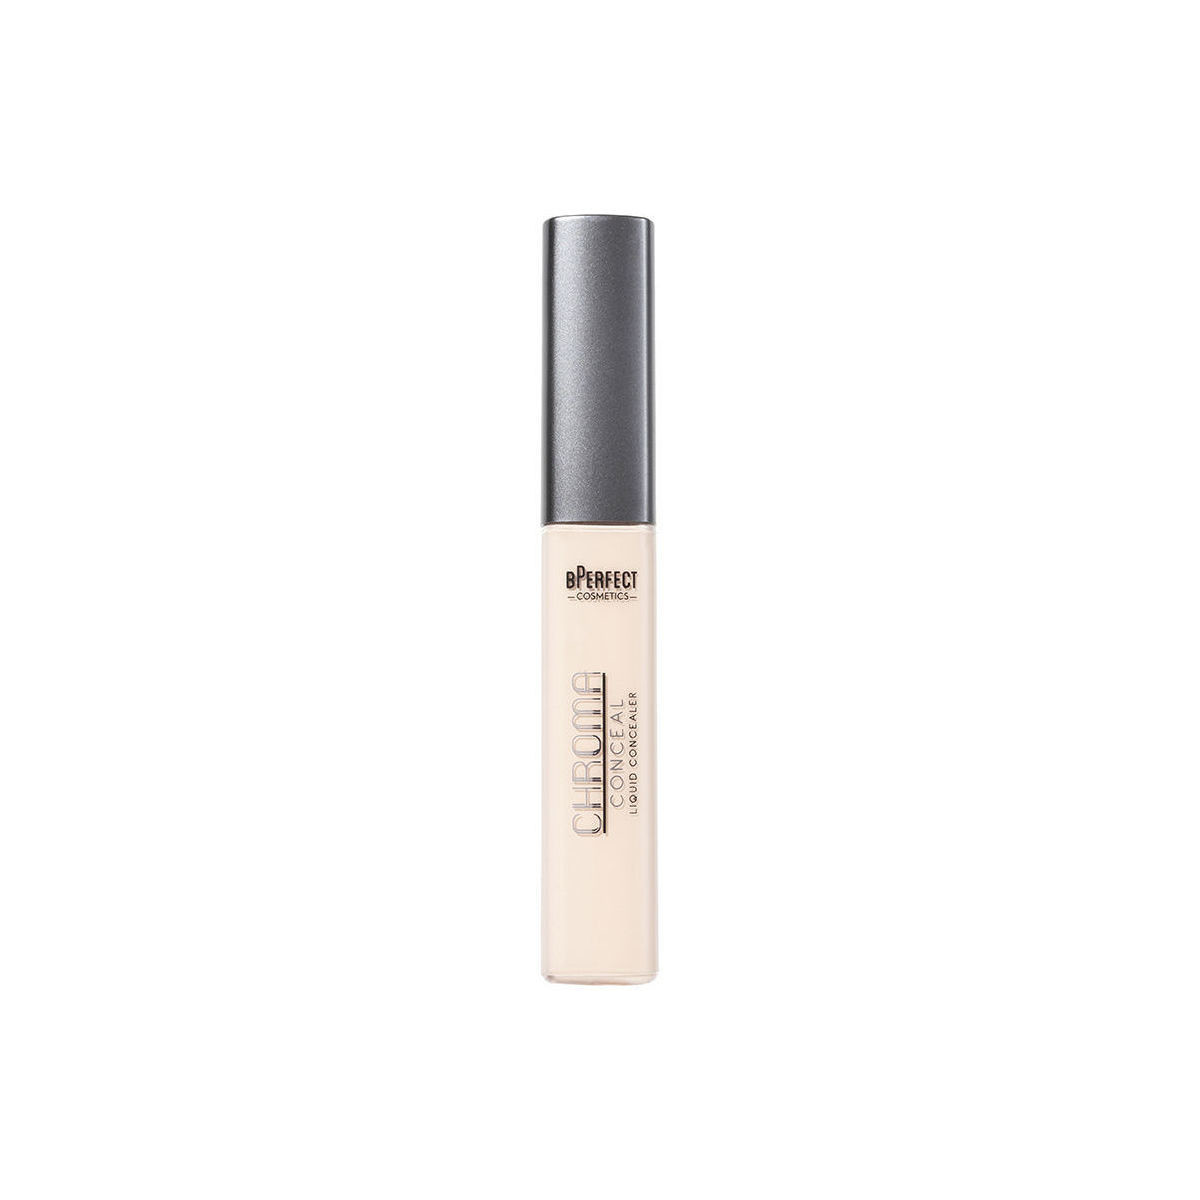 Beauty Make-up & Foundation  Bperfect Cosmetics Chroma Conceal Liquid Concealer c2 